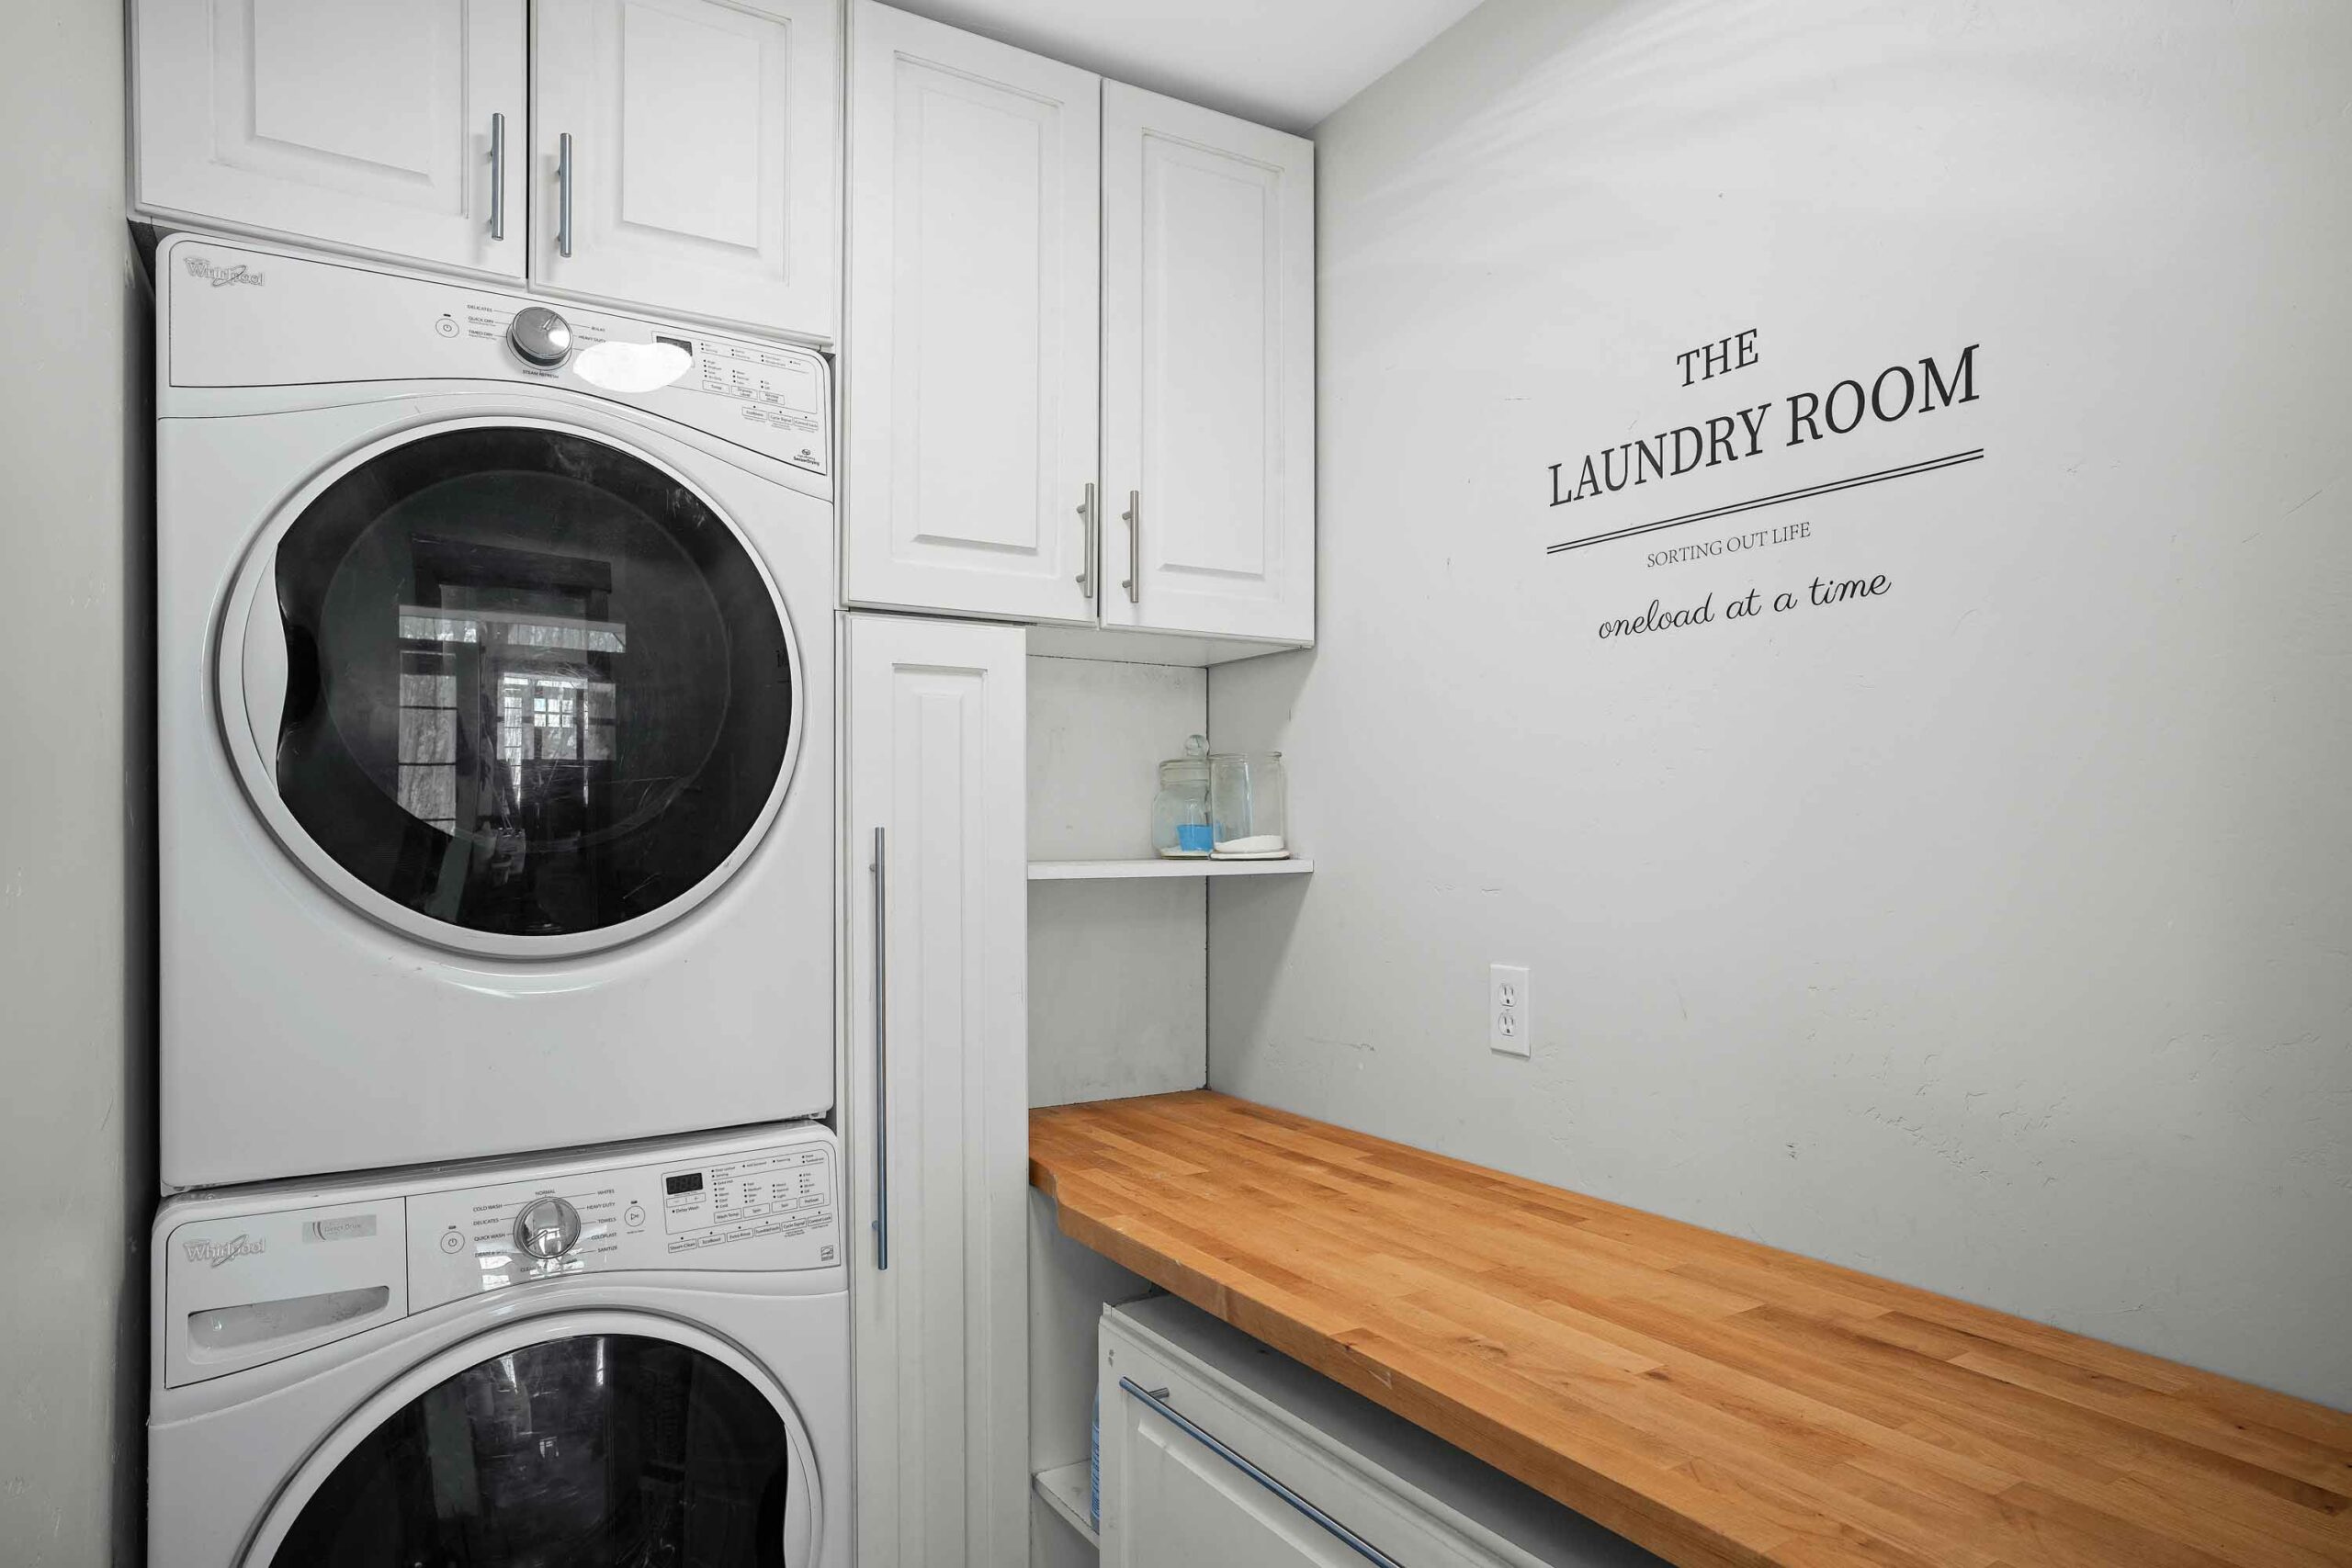 42 Ruby Drive Mt. Crested Butte, Colorado - laundry room